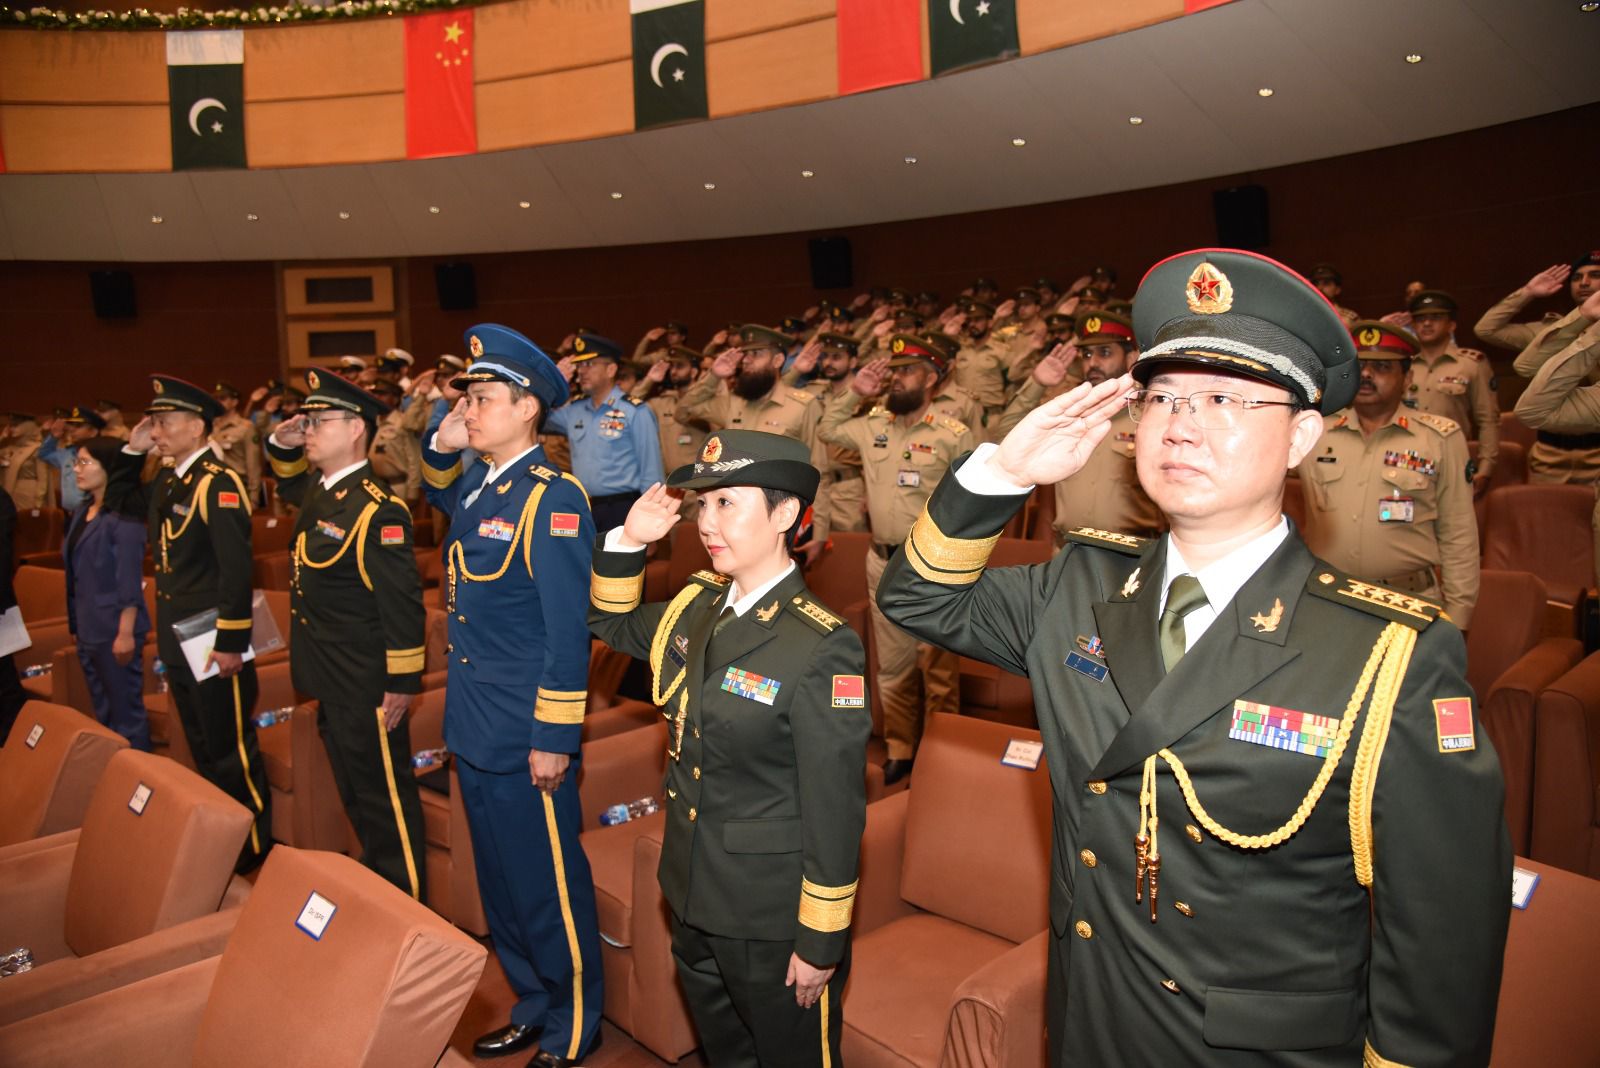 96th Anniversary of the founding of People’s Liberation Army (PLA) of China was commemorated at GHQ.